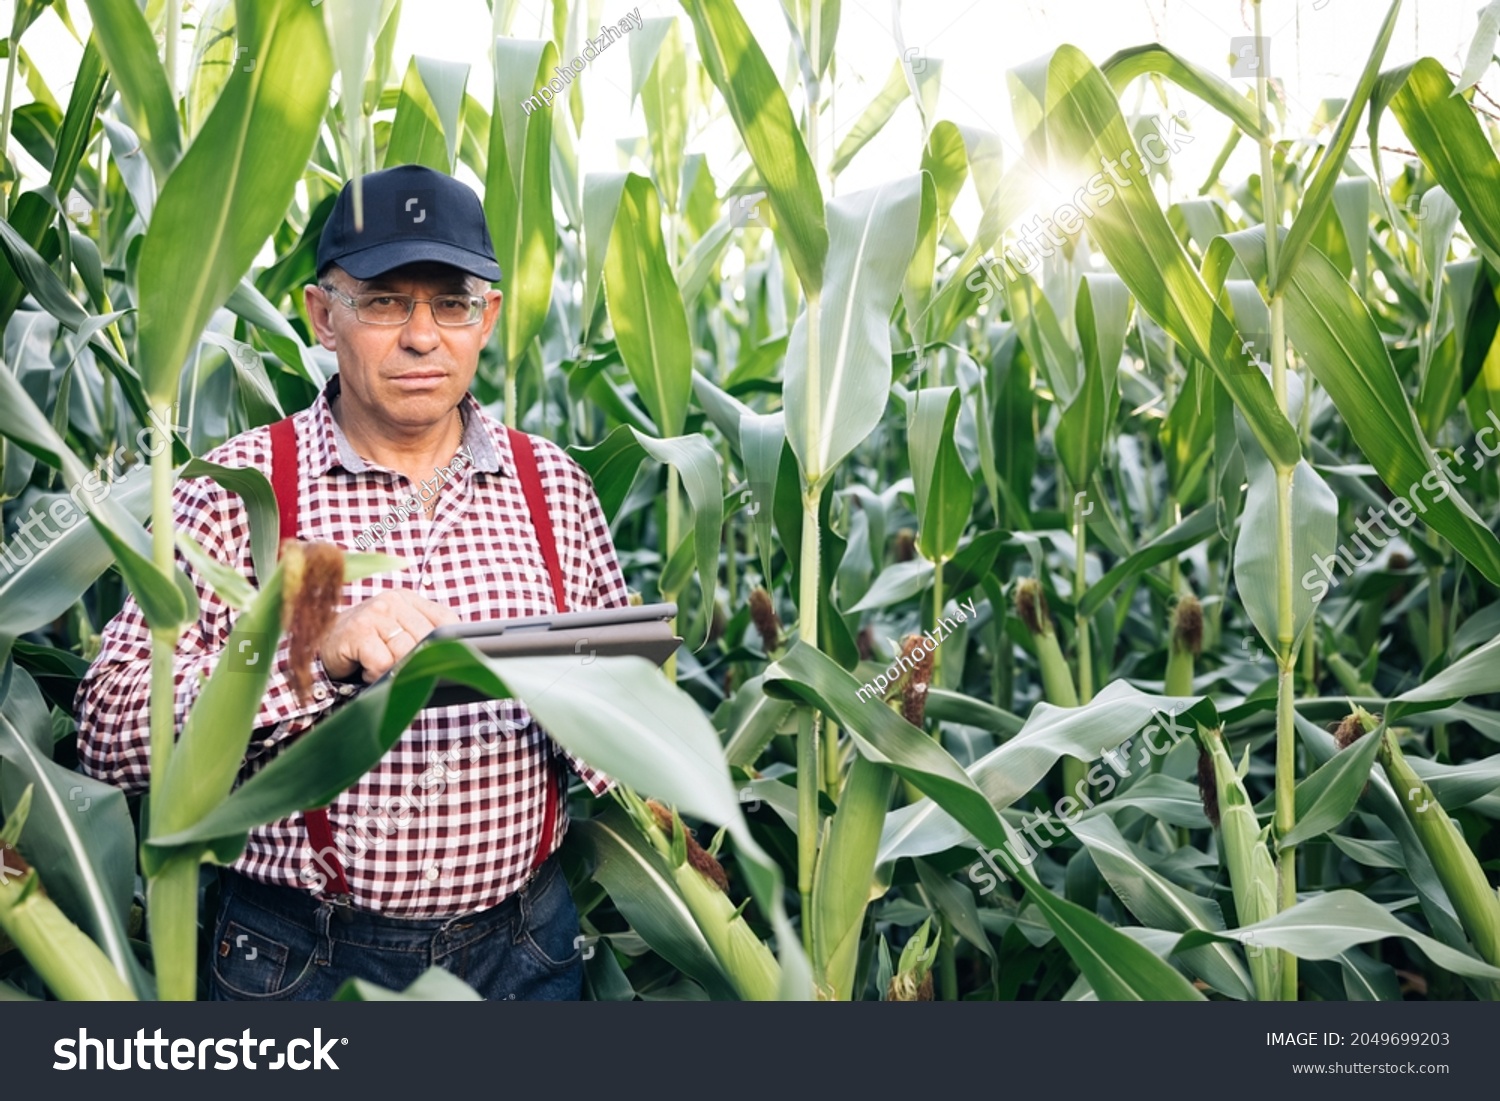 Agribusiness technology in the field ipad agricultural control precision agriculture Farmer ipad in cultivated corn field, applying modern technology in agricultural activity #2049699203